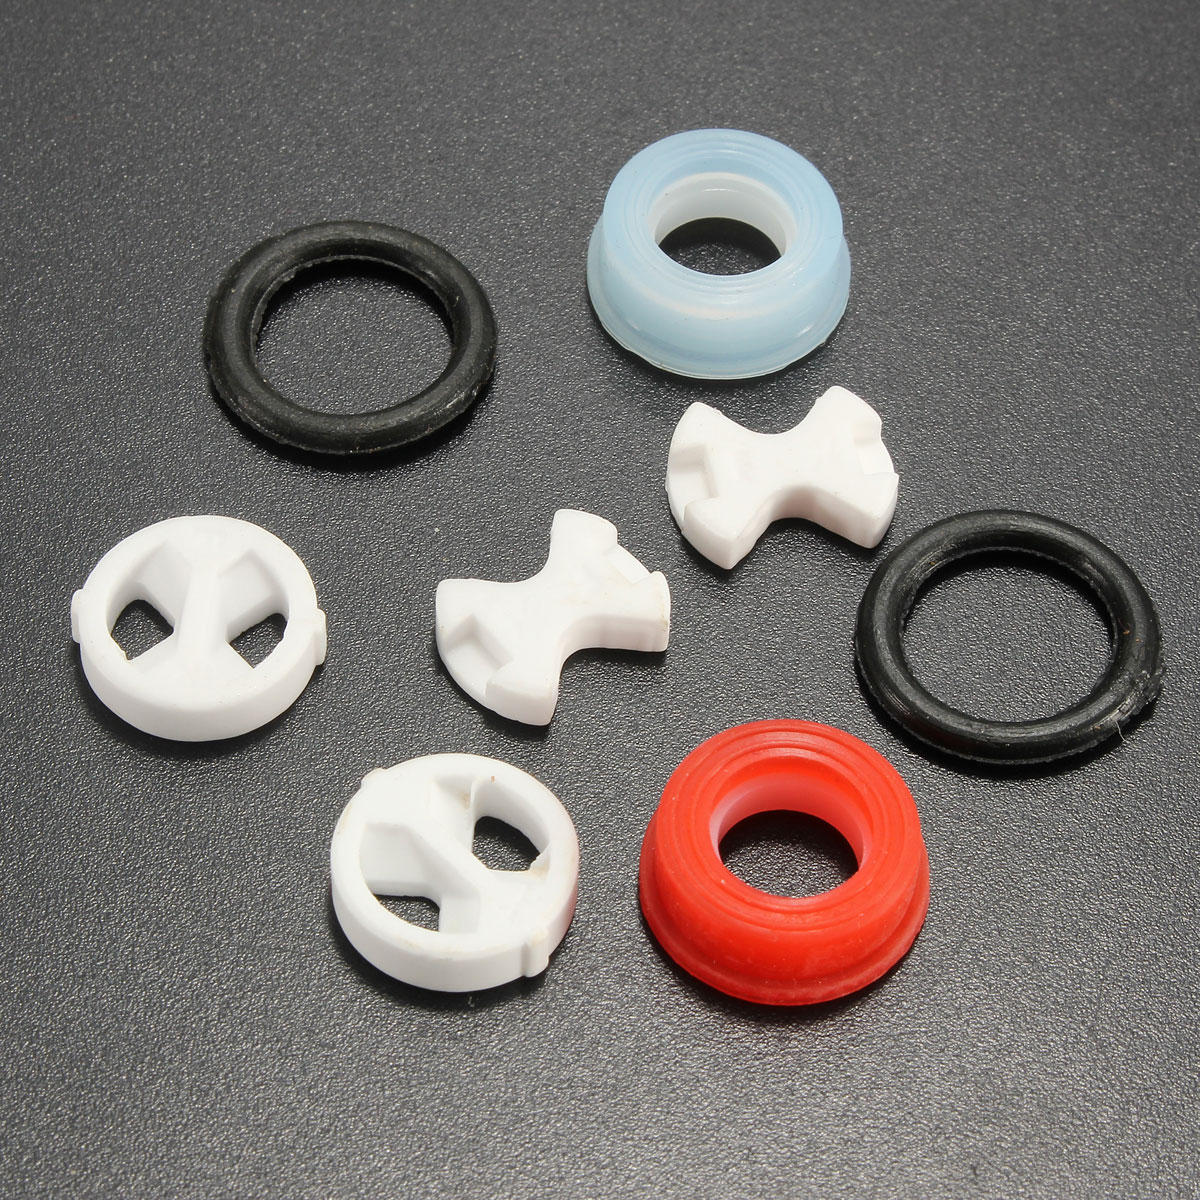 8Pcs Ceramic Disc Silicon Washer Insert Turn Replacement For Valve Tap